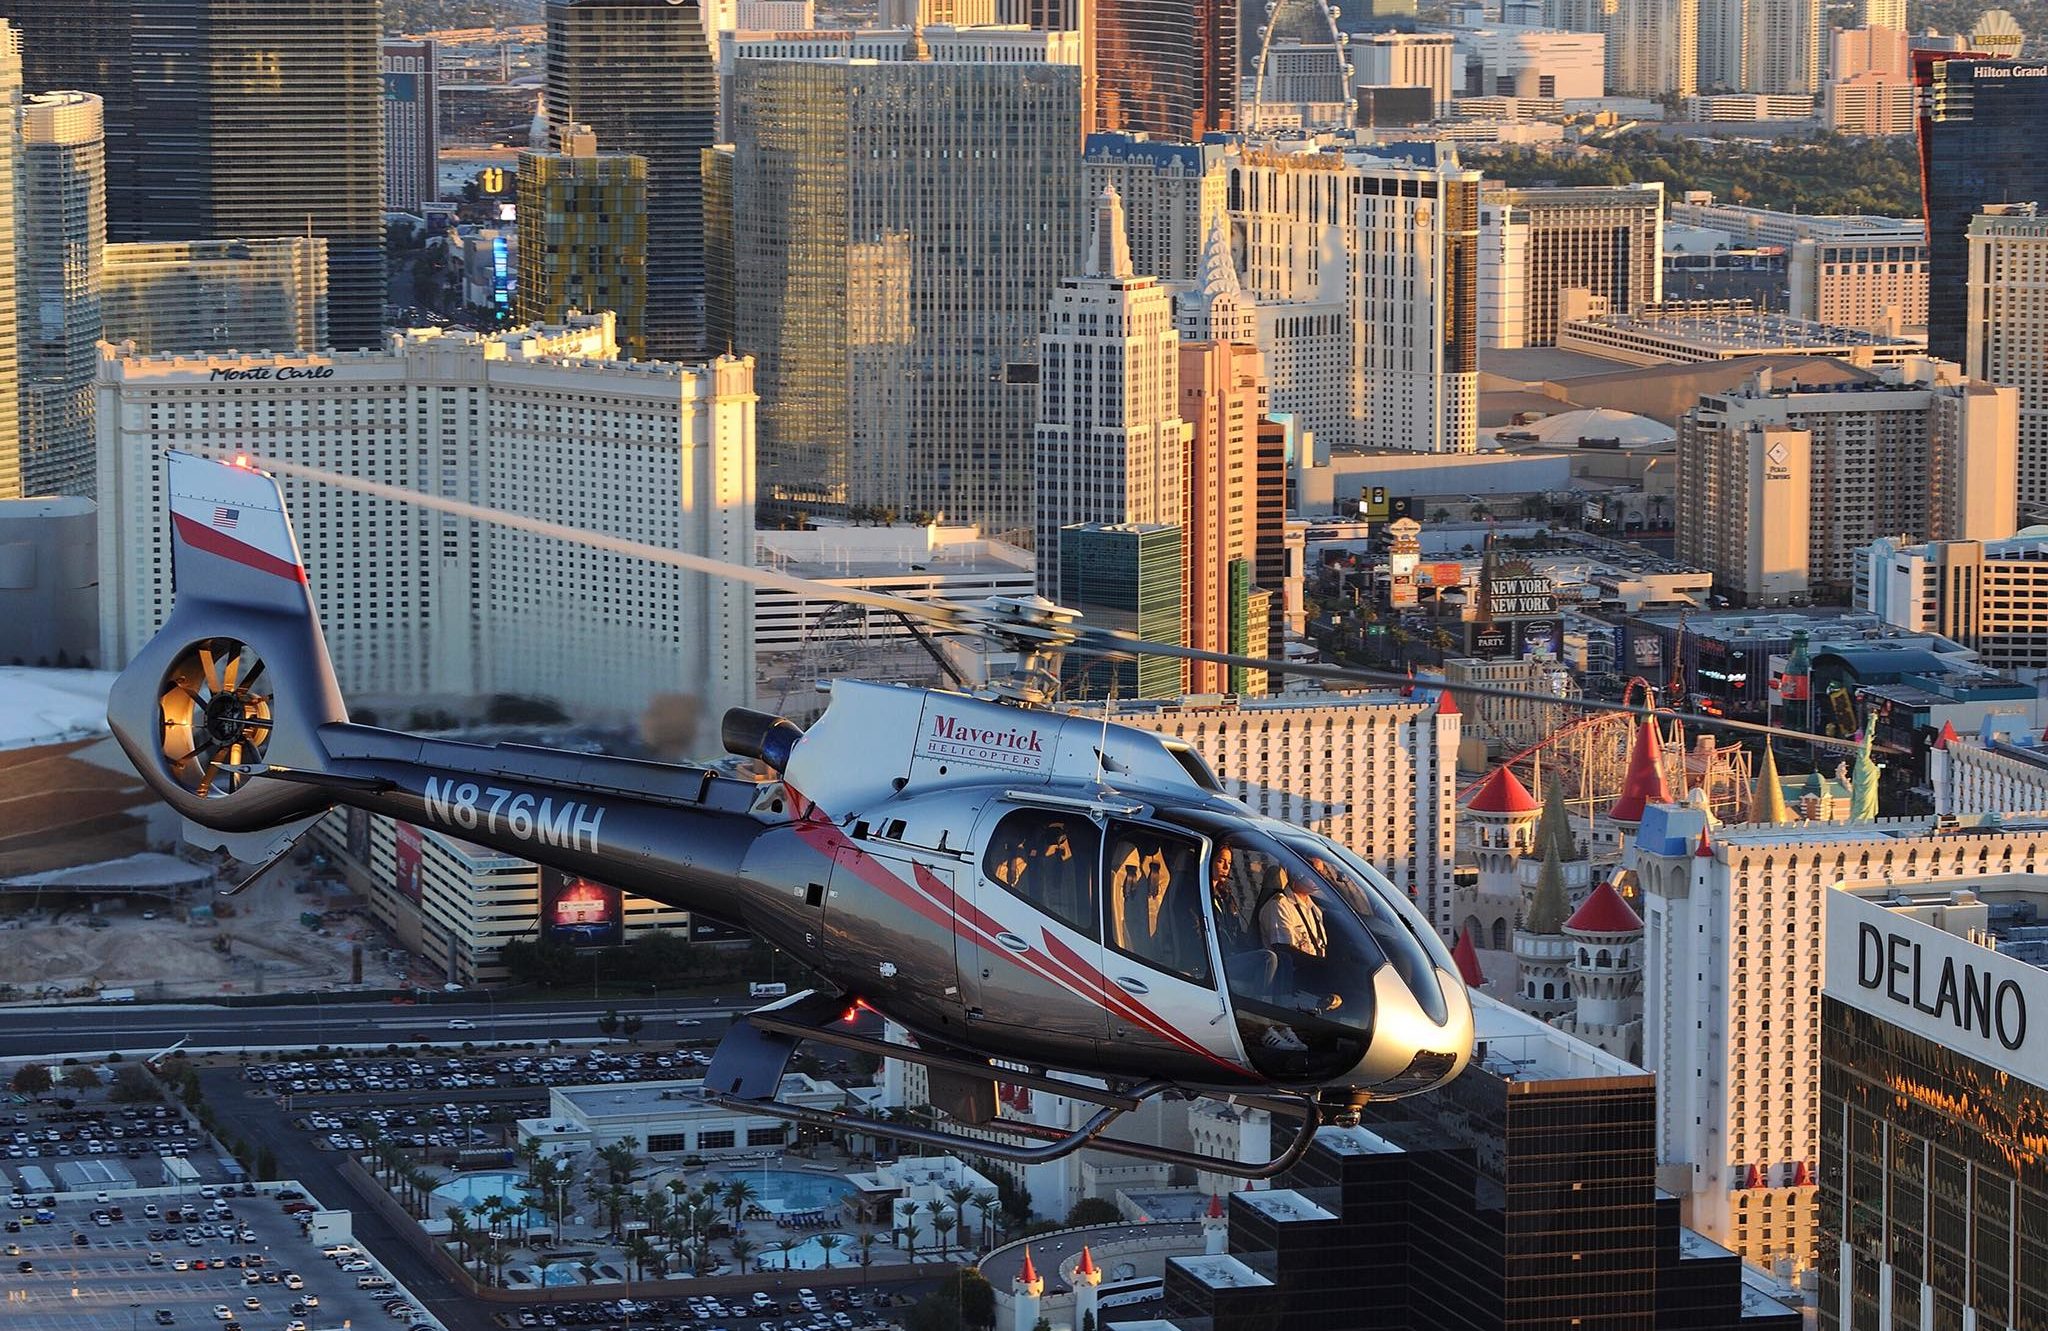 Las Vegas Helicopter Tour Day or Night Flight